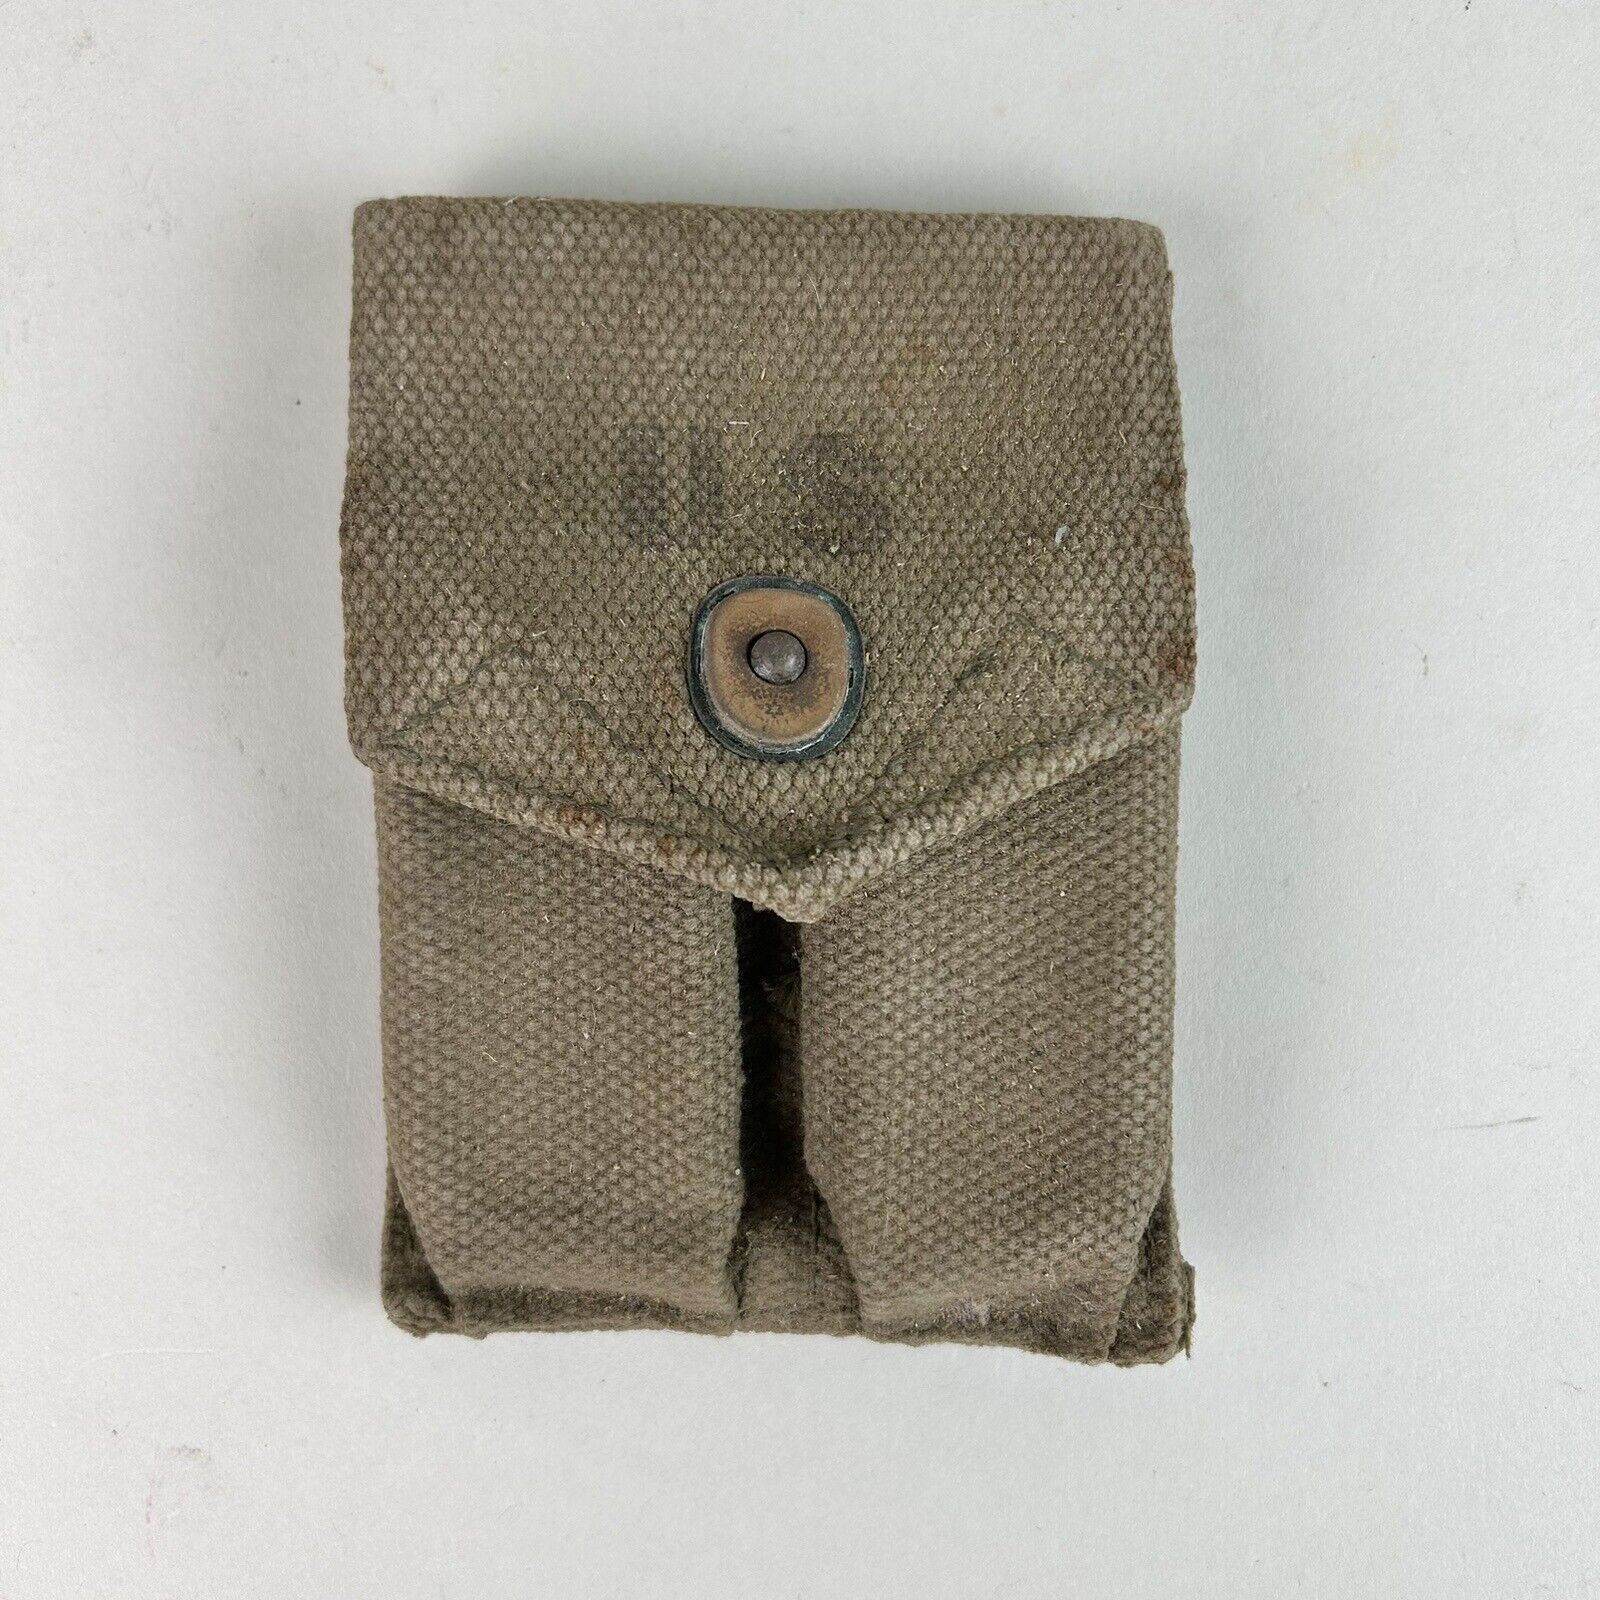 VTG OLD US Military M1911 Magazine Pouch OD Canvas Original Markings & Clips USA